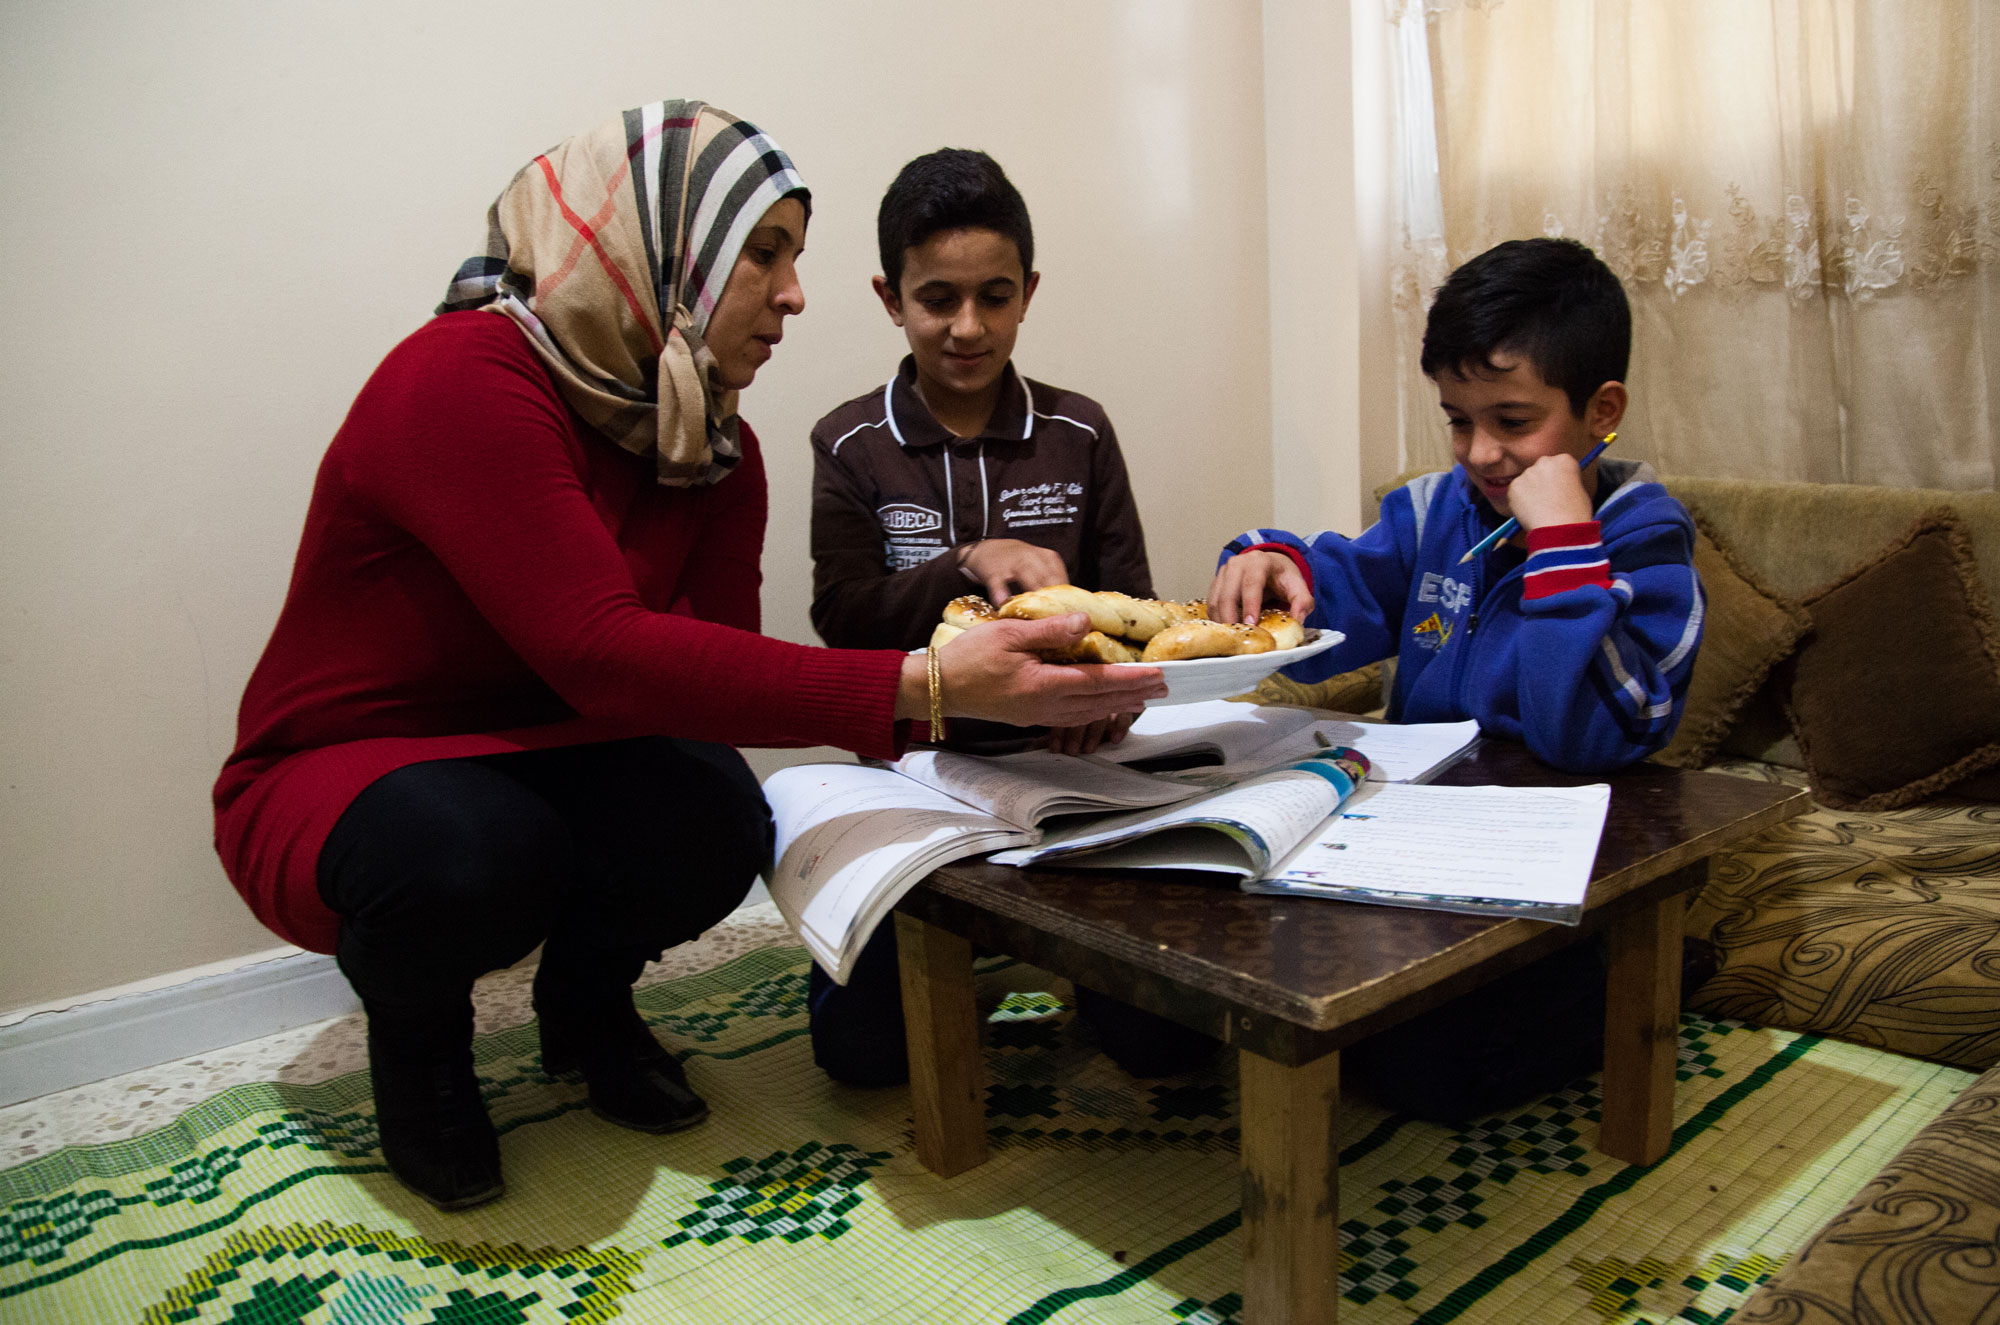 Majida offers freshly baked pastries to her sons while they do their homework.